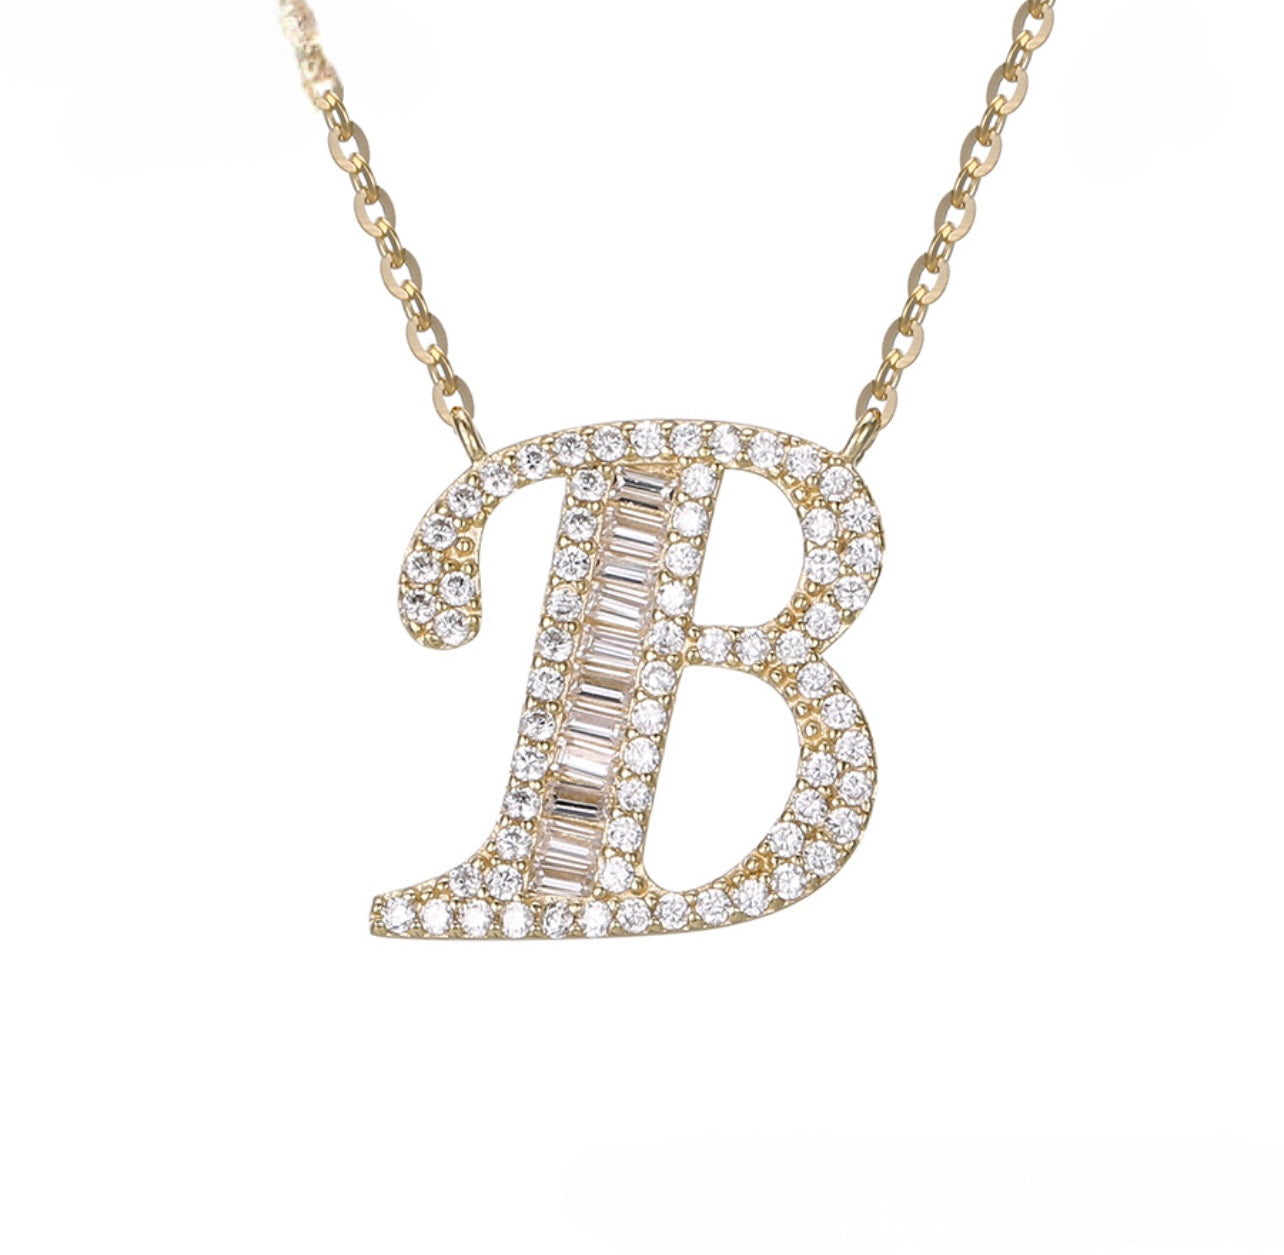 S925 Silver 14k Gold Plated Initial B Necklace